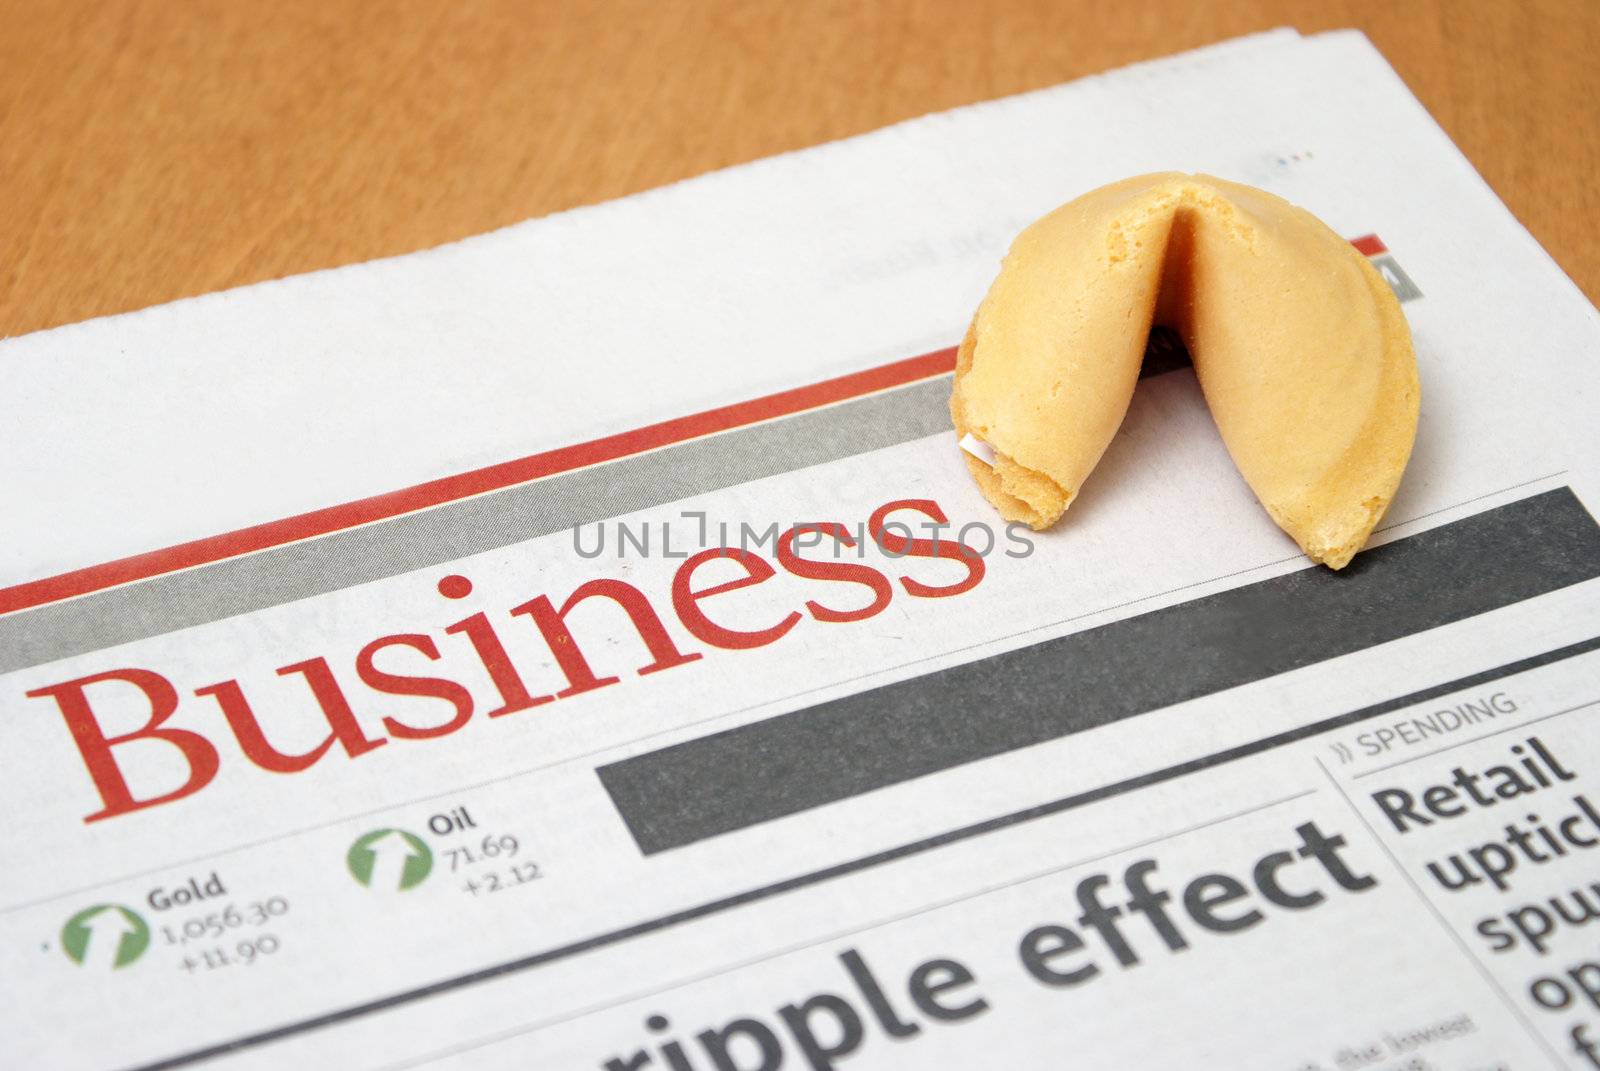 A fortune cookie on the business section of a newspaper.